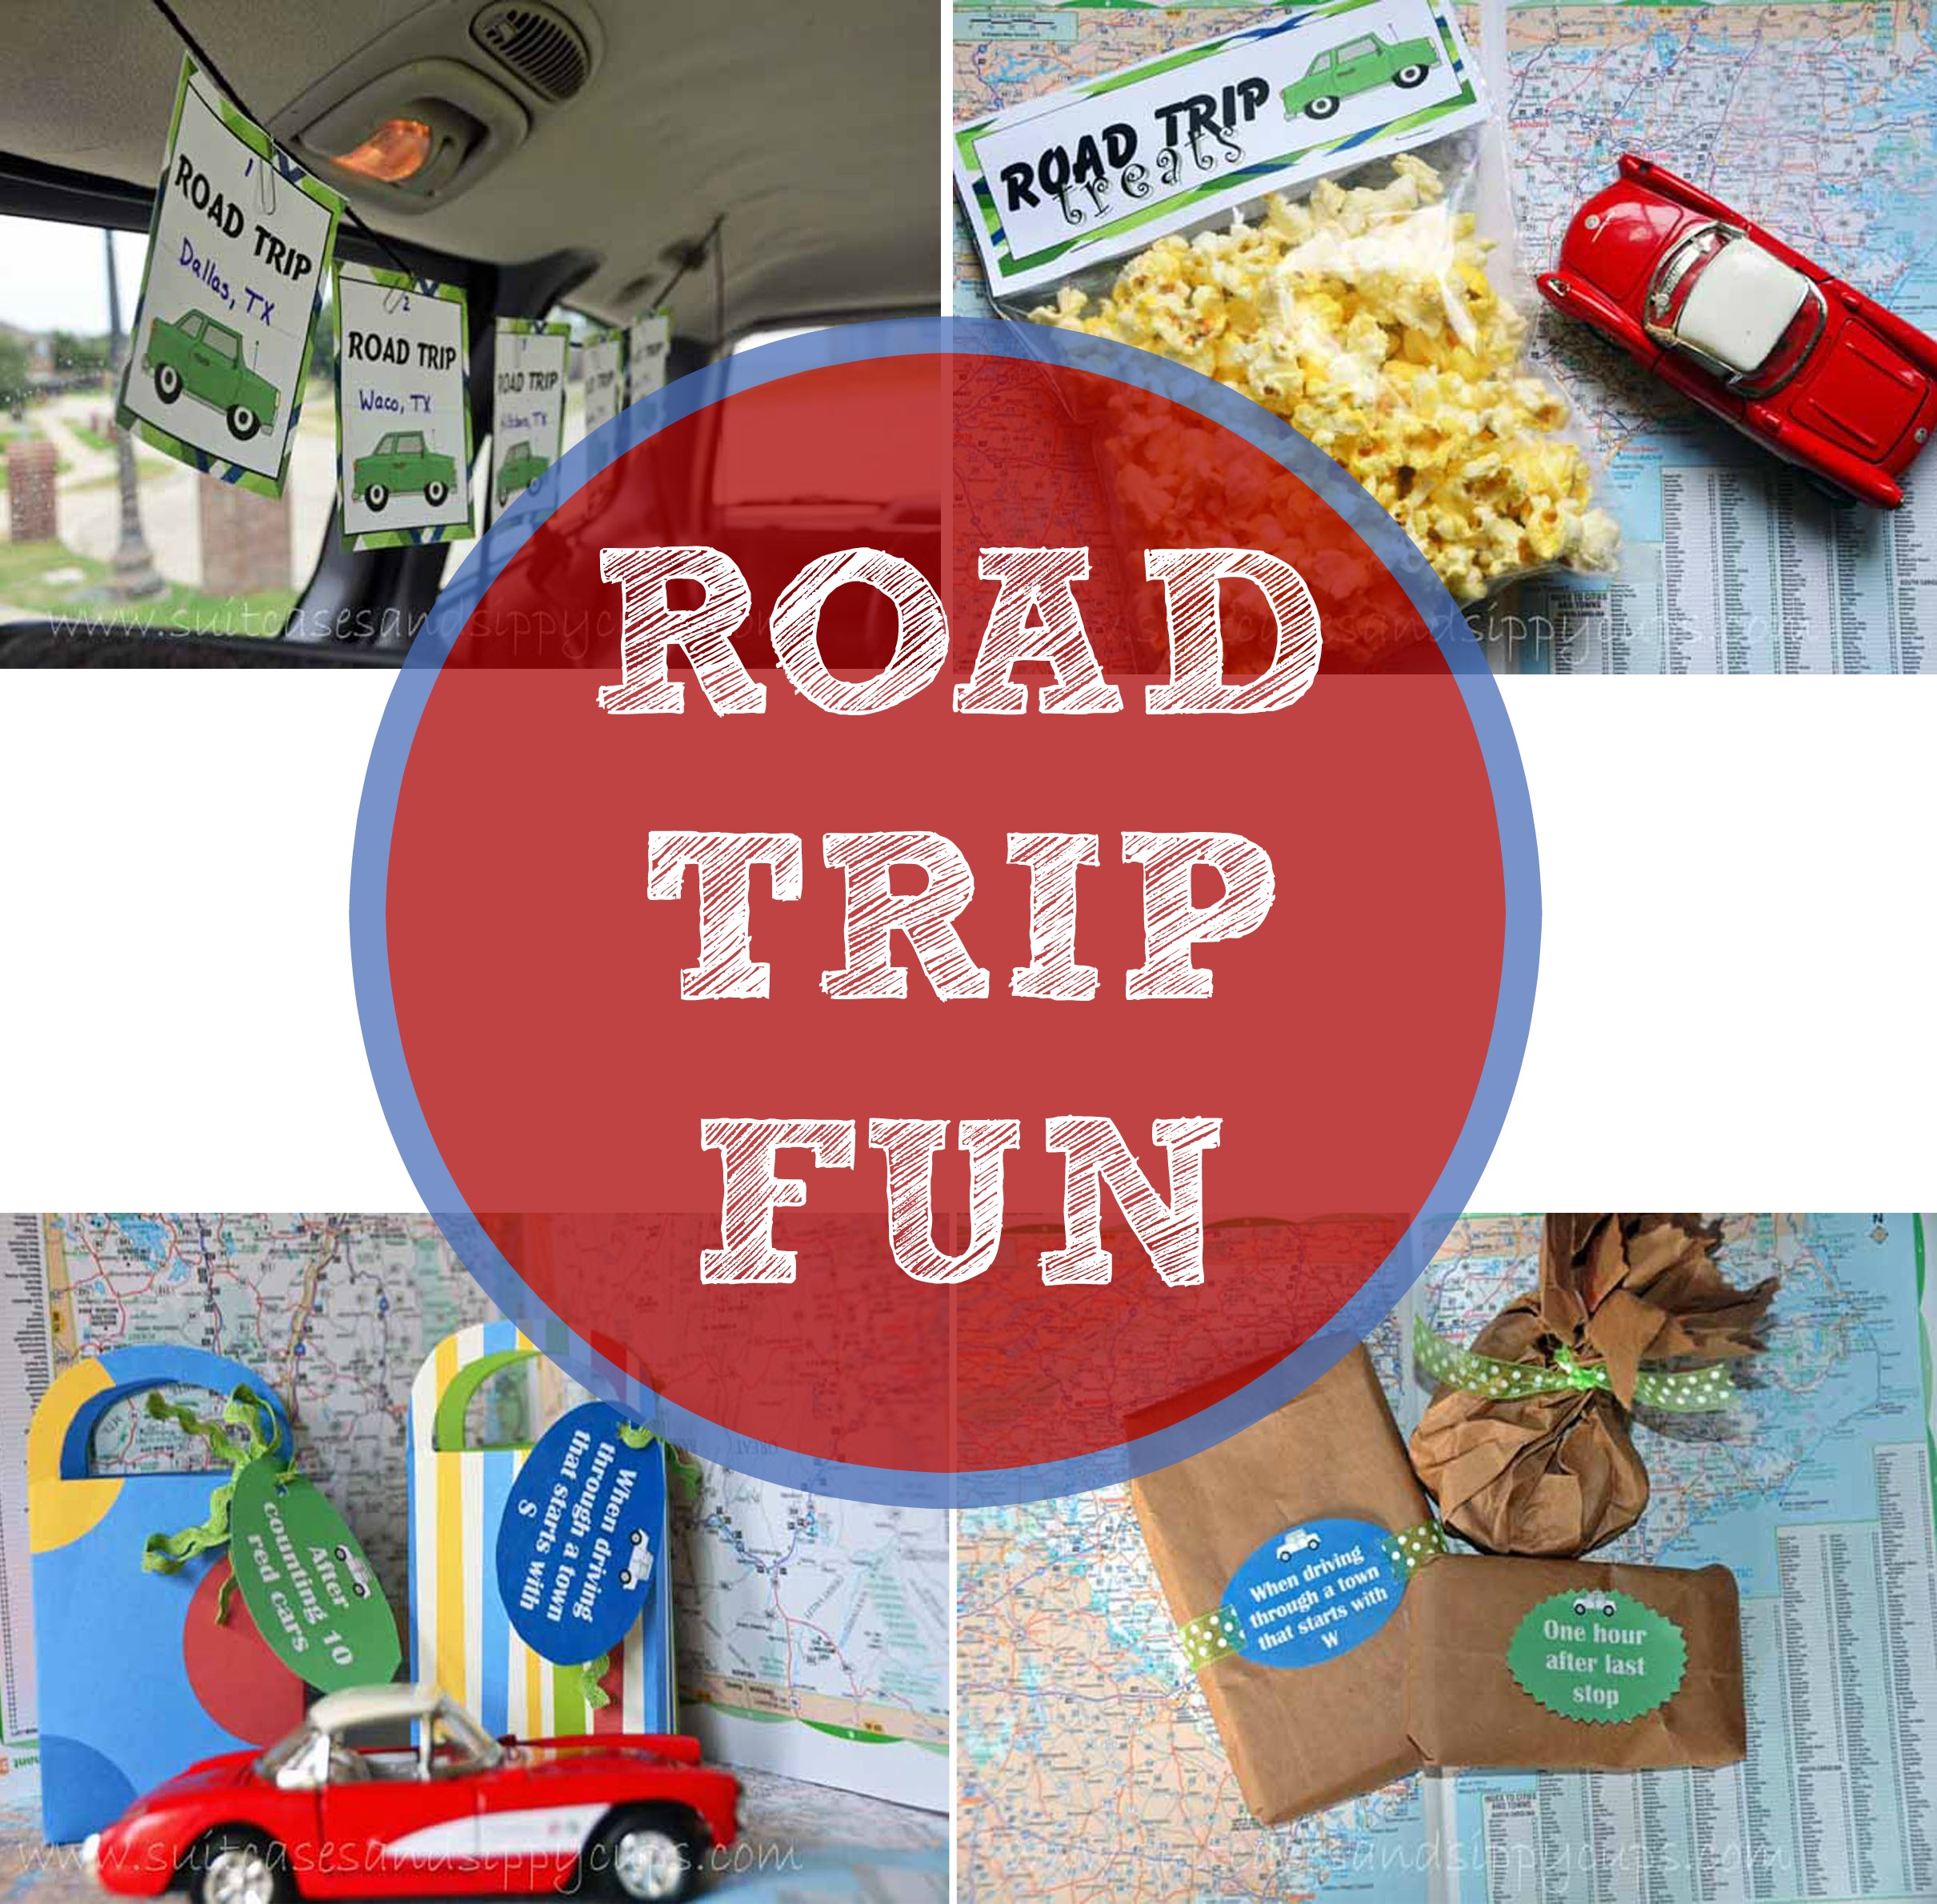 http://www.suitcasesandsippycups.com/wp-content/uploads/2015/08/road-trip-activities.jpg